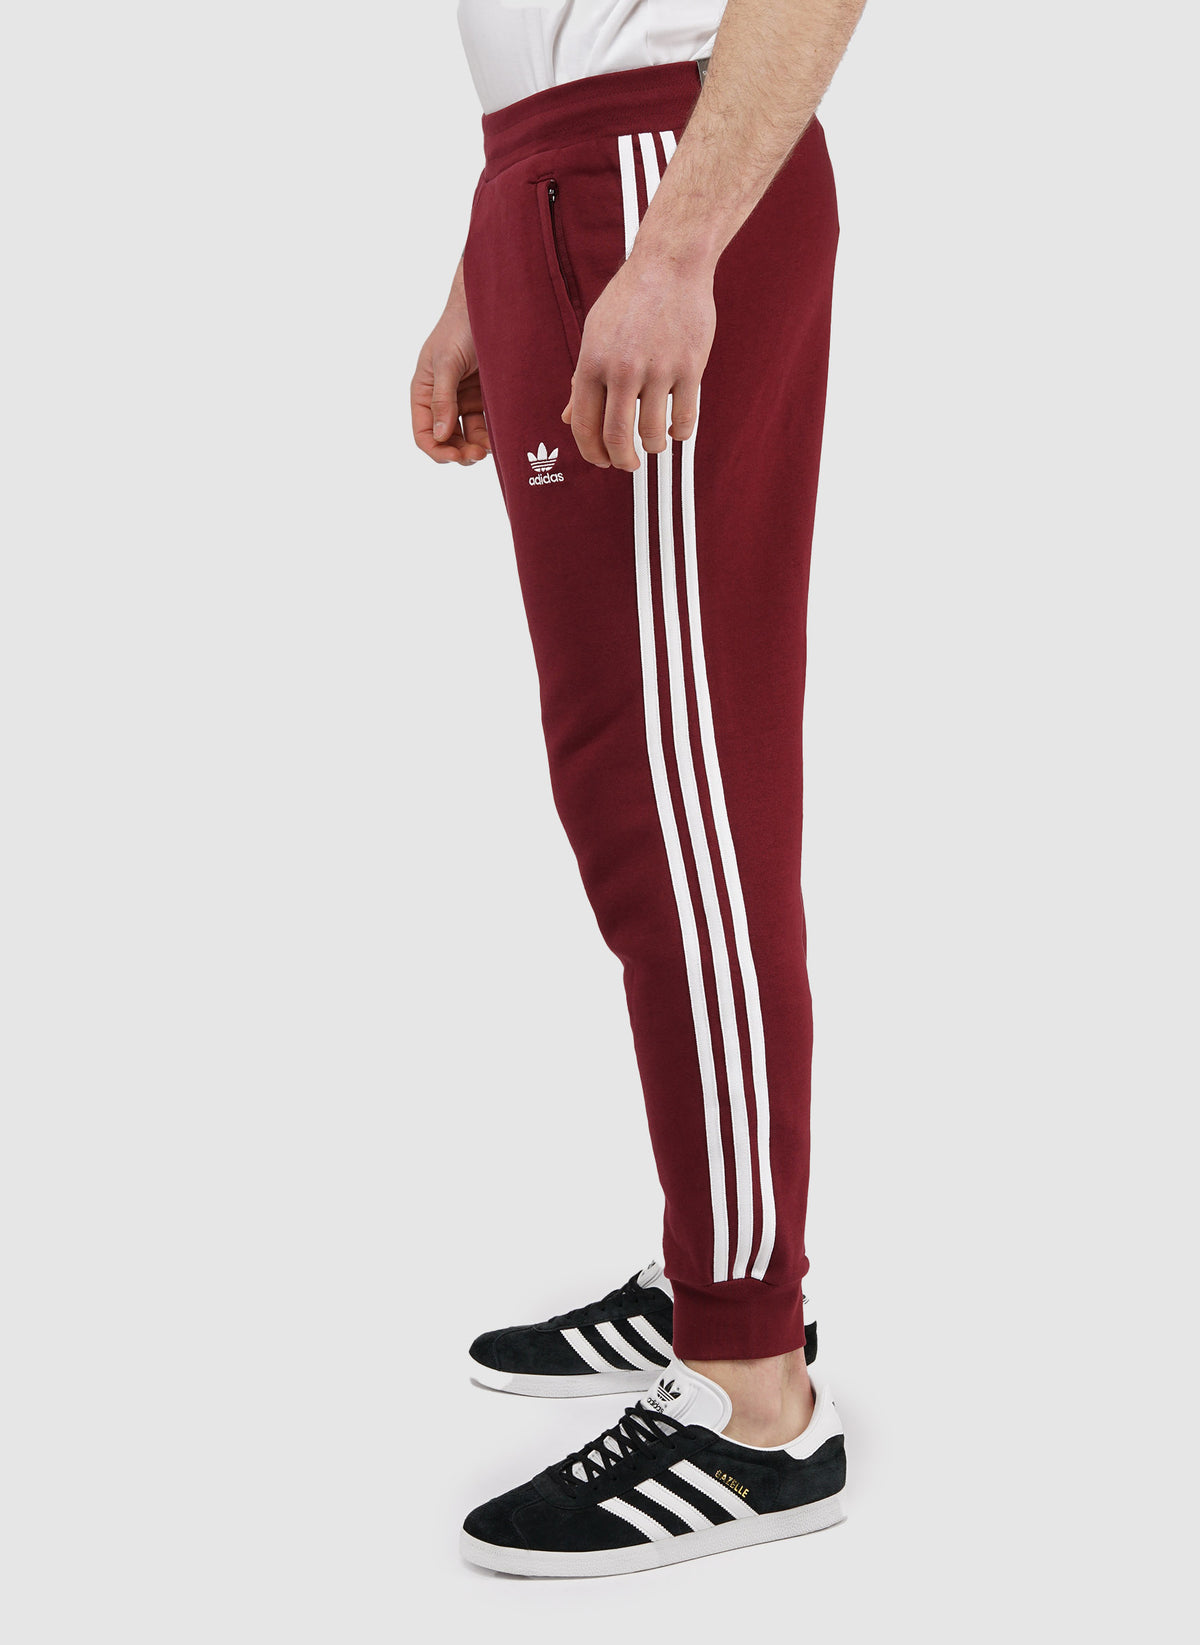 3 Stripes Pant - Red